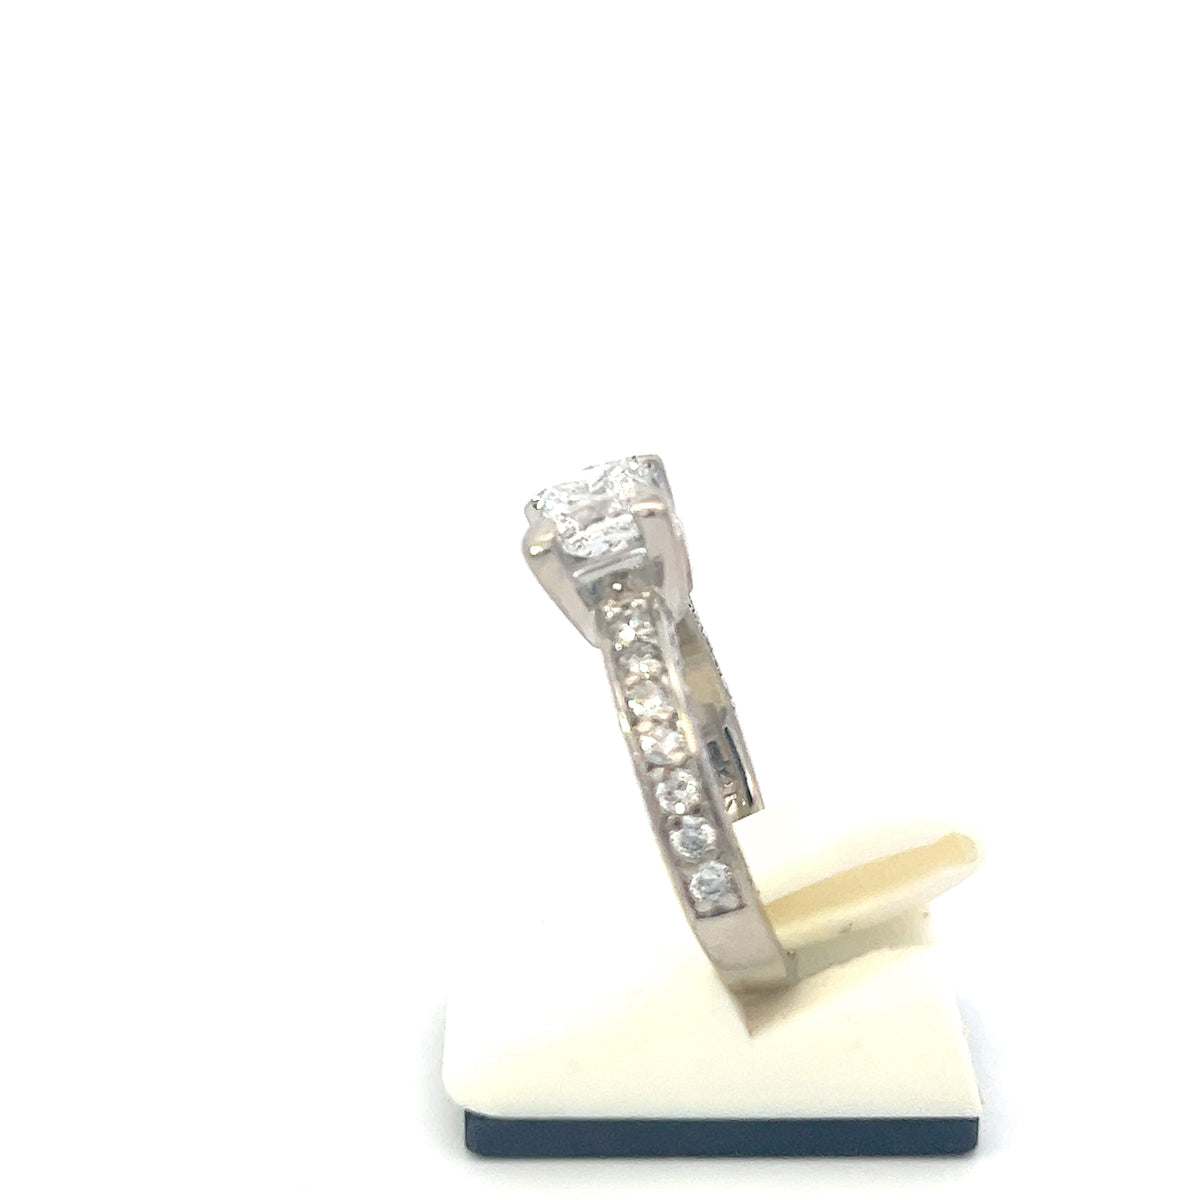 Previously Loved - 2.24cttw Princess Cut Diamond Engagement Ring Set